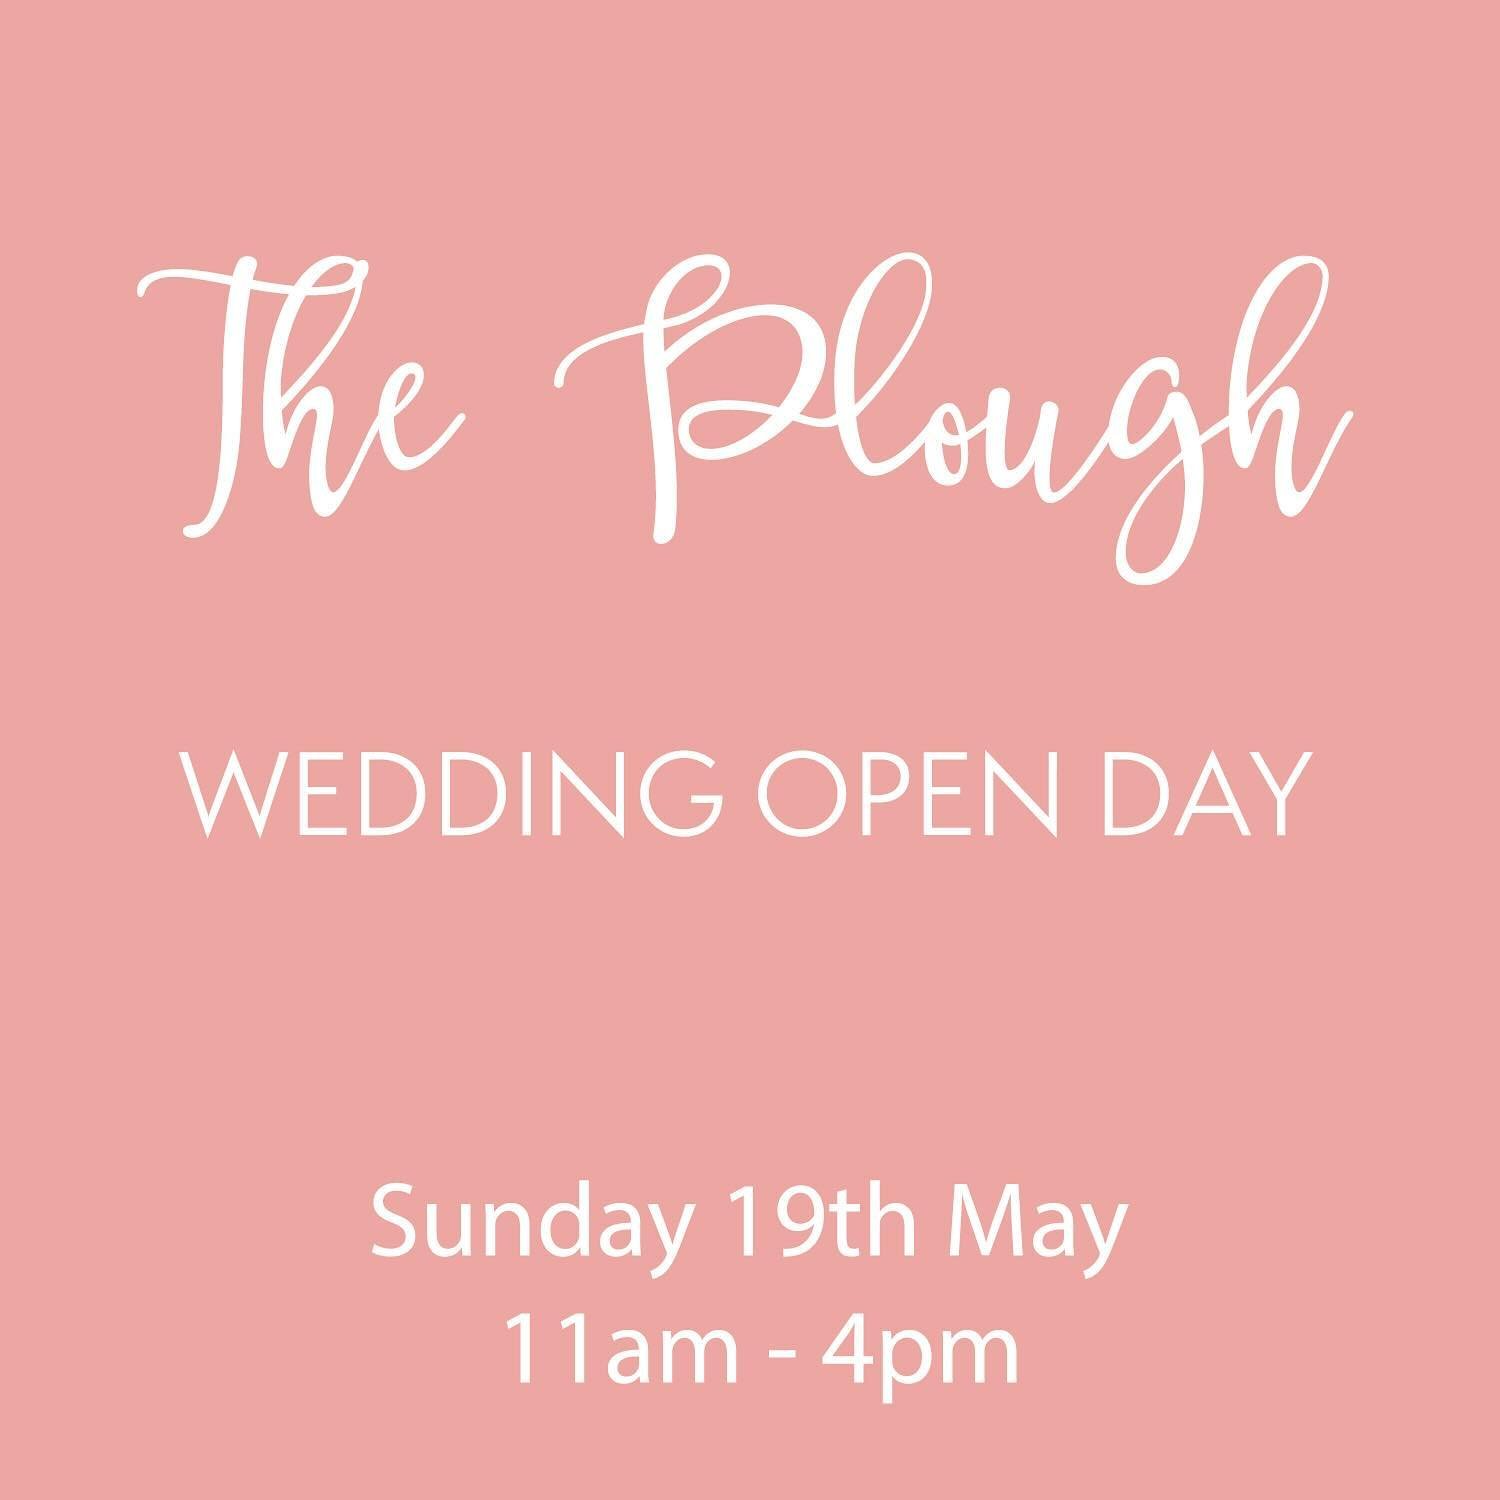 Exciting news! 🎉 The Plough At Leigh Wedding Open Day is back on Sunday, May 19th, from 11am to 4pm! 😁

If you&rsquo;re envisioning your dream wedding, this is the perfect opportunity to explore this stunning venue, meet the friendly team, and conn